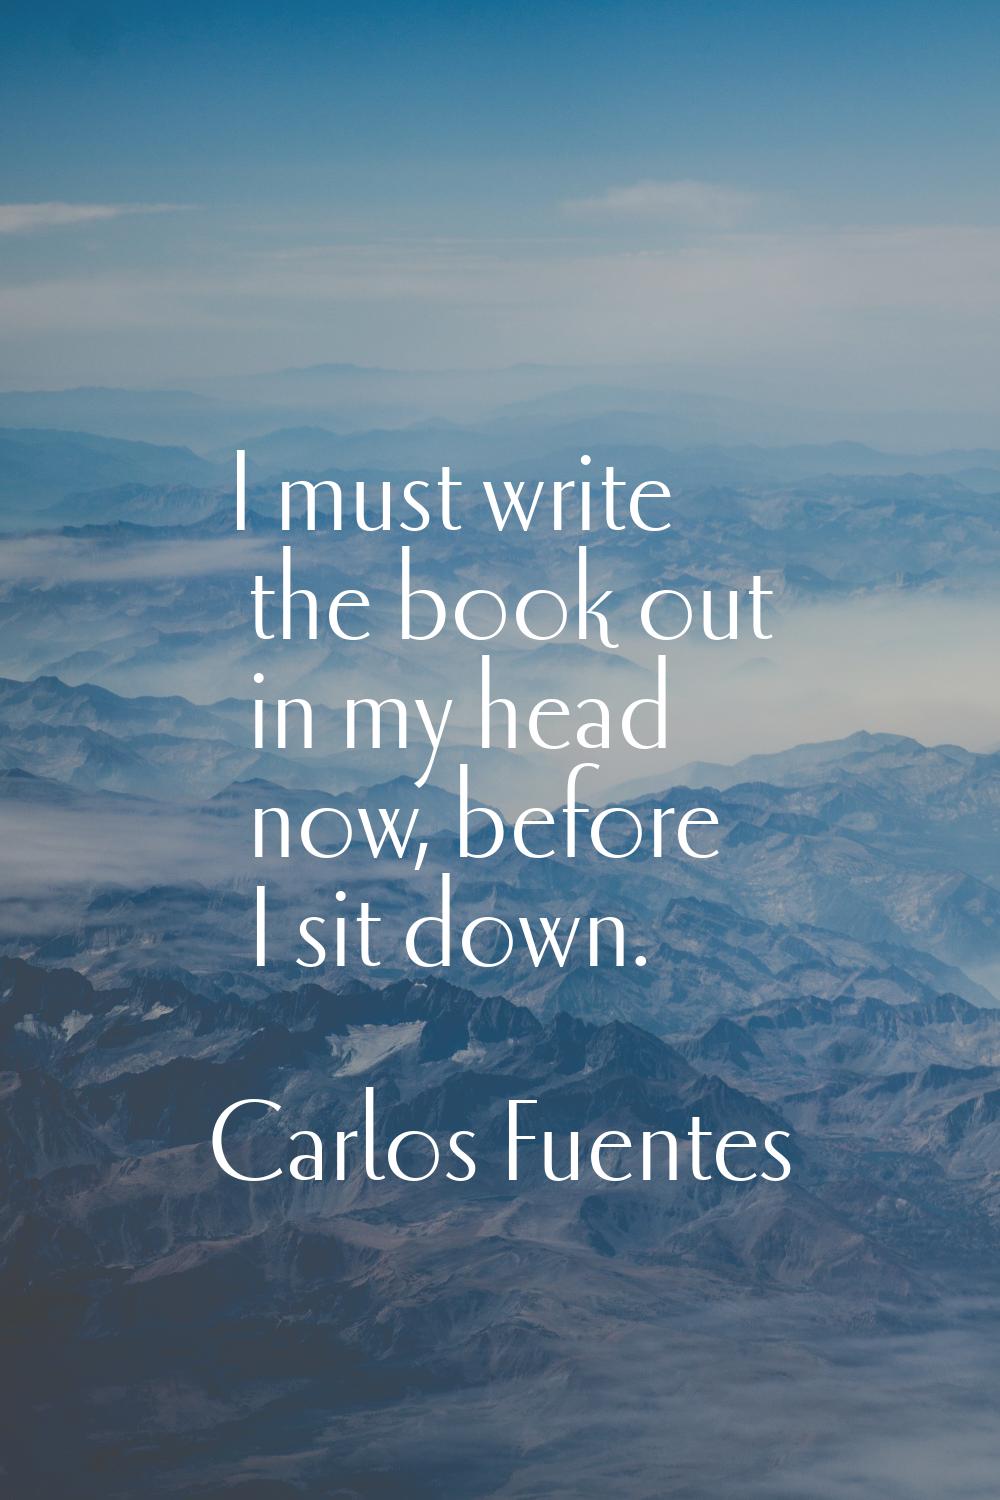 I must write the book out in my head now, before I sit down.